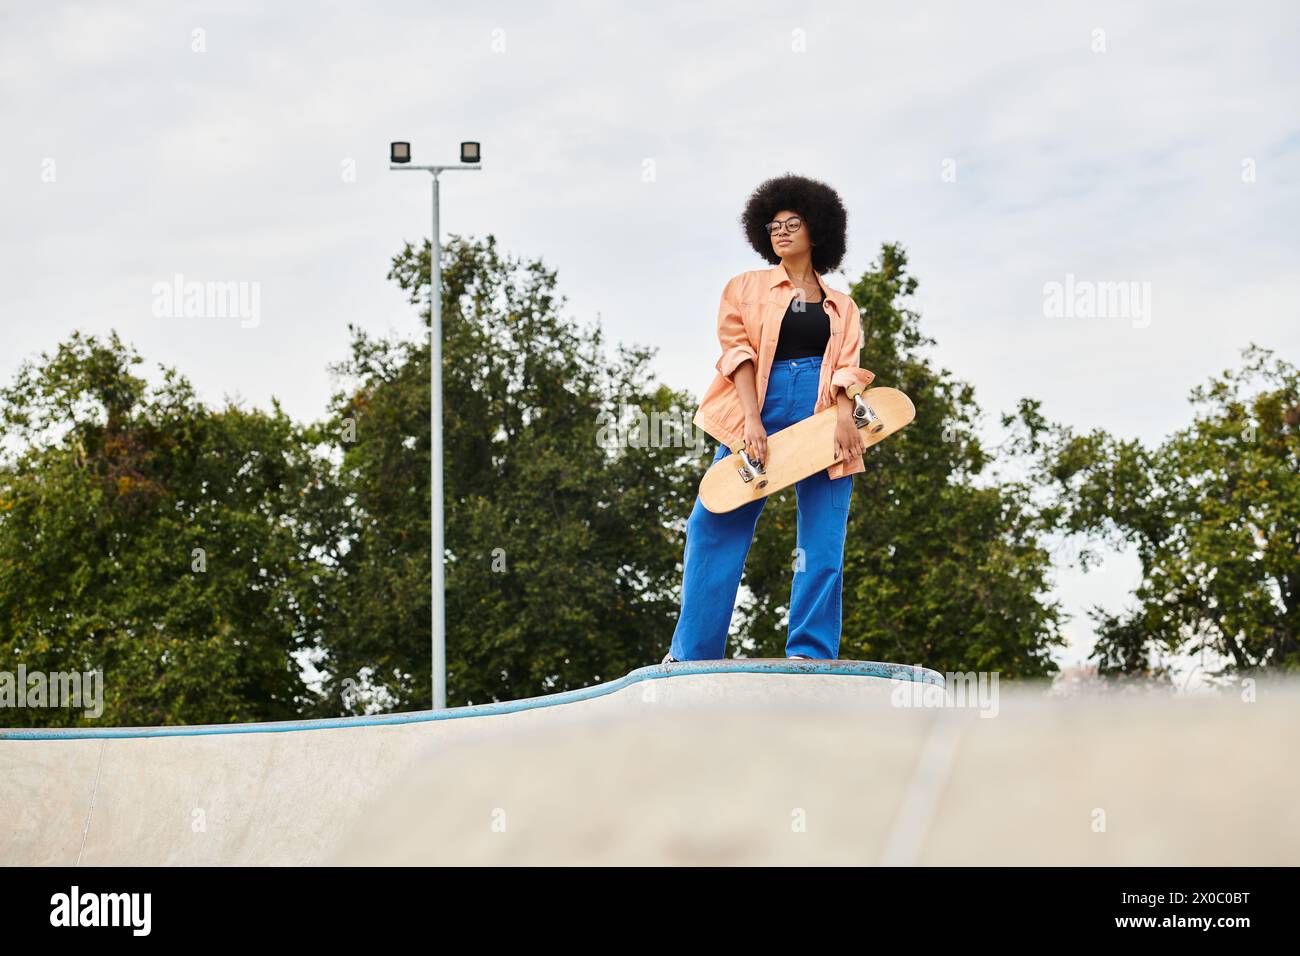 A young African American woman with curly hair confidently stands atop a skateboard ramp at an outdoor skate park. Stock Photo